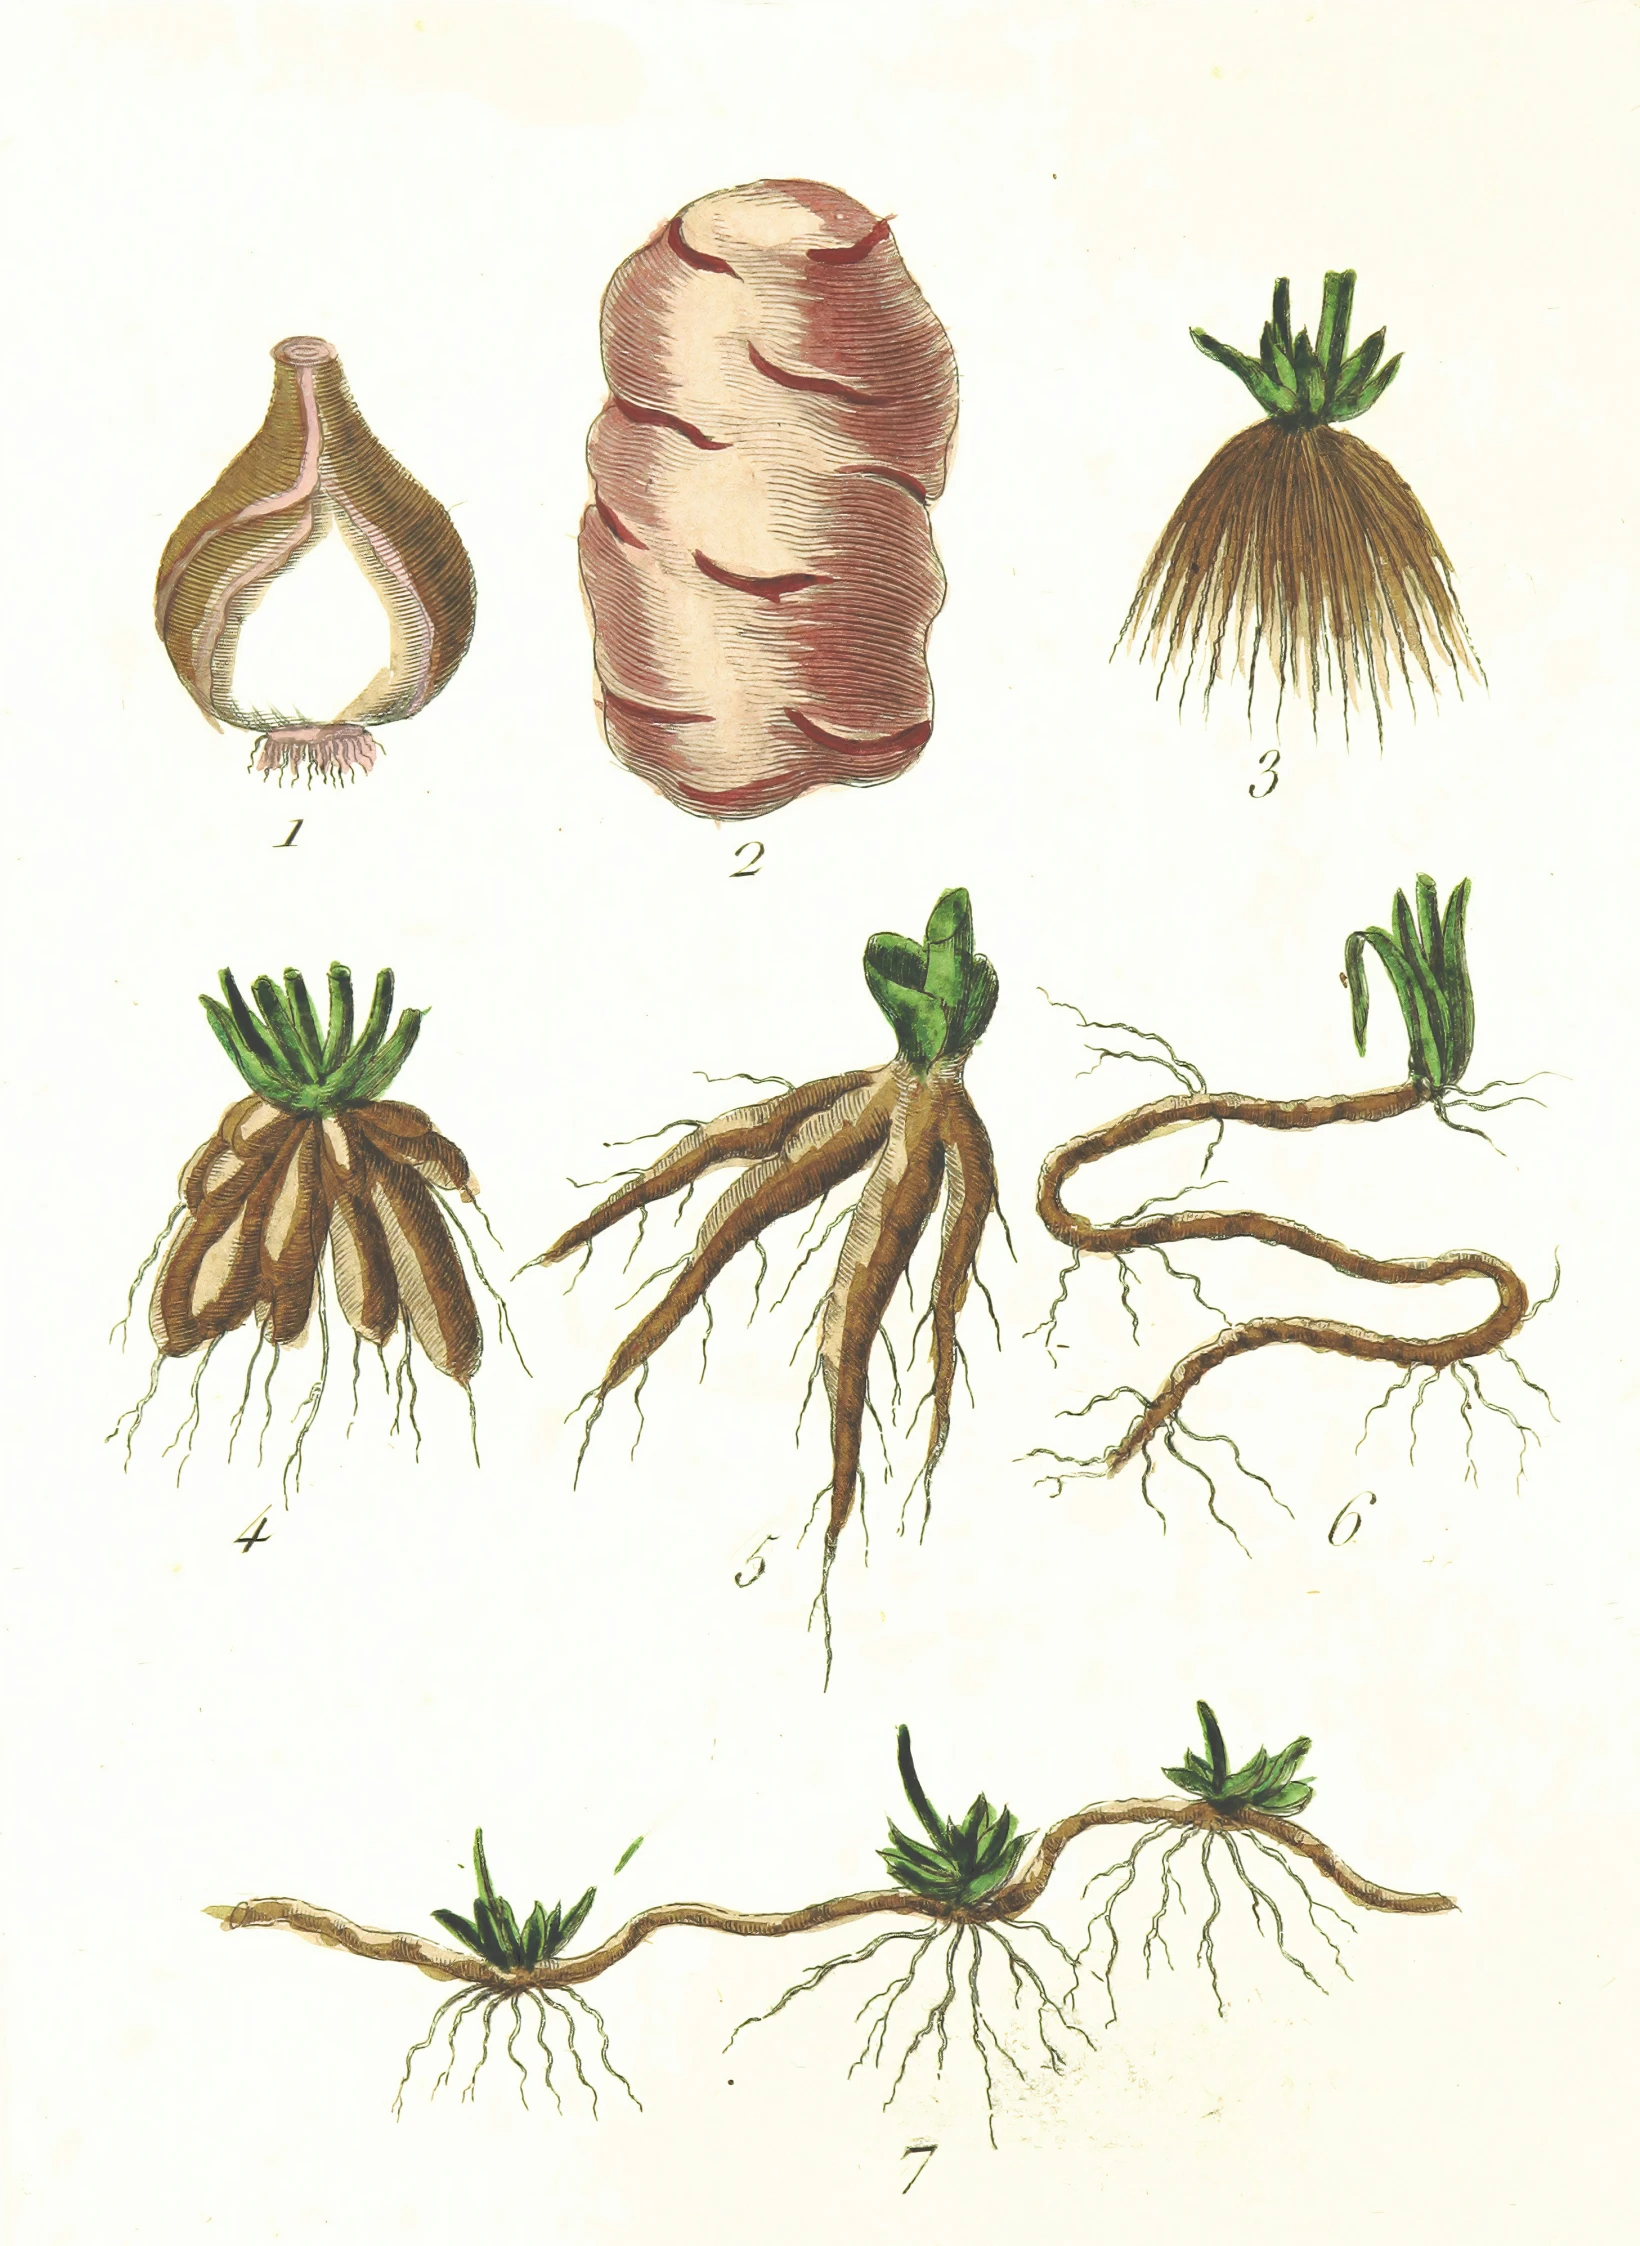 a drawing of different stages of plant life